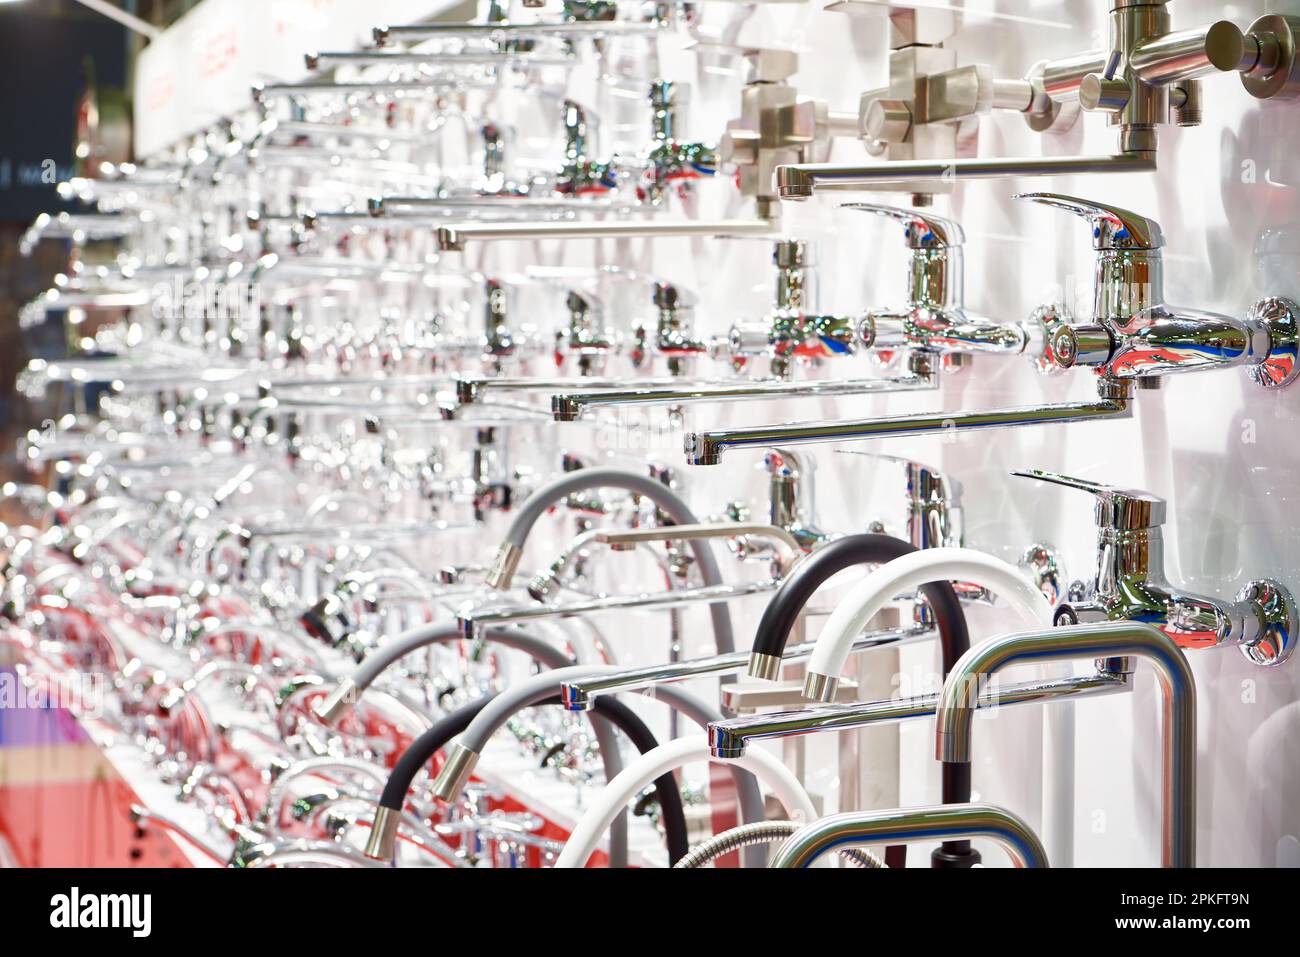 Water faucets in hardware store Stock Photo